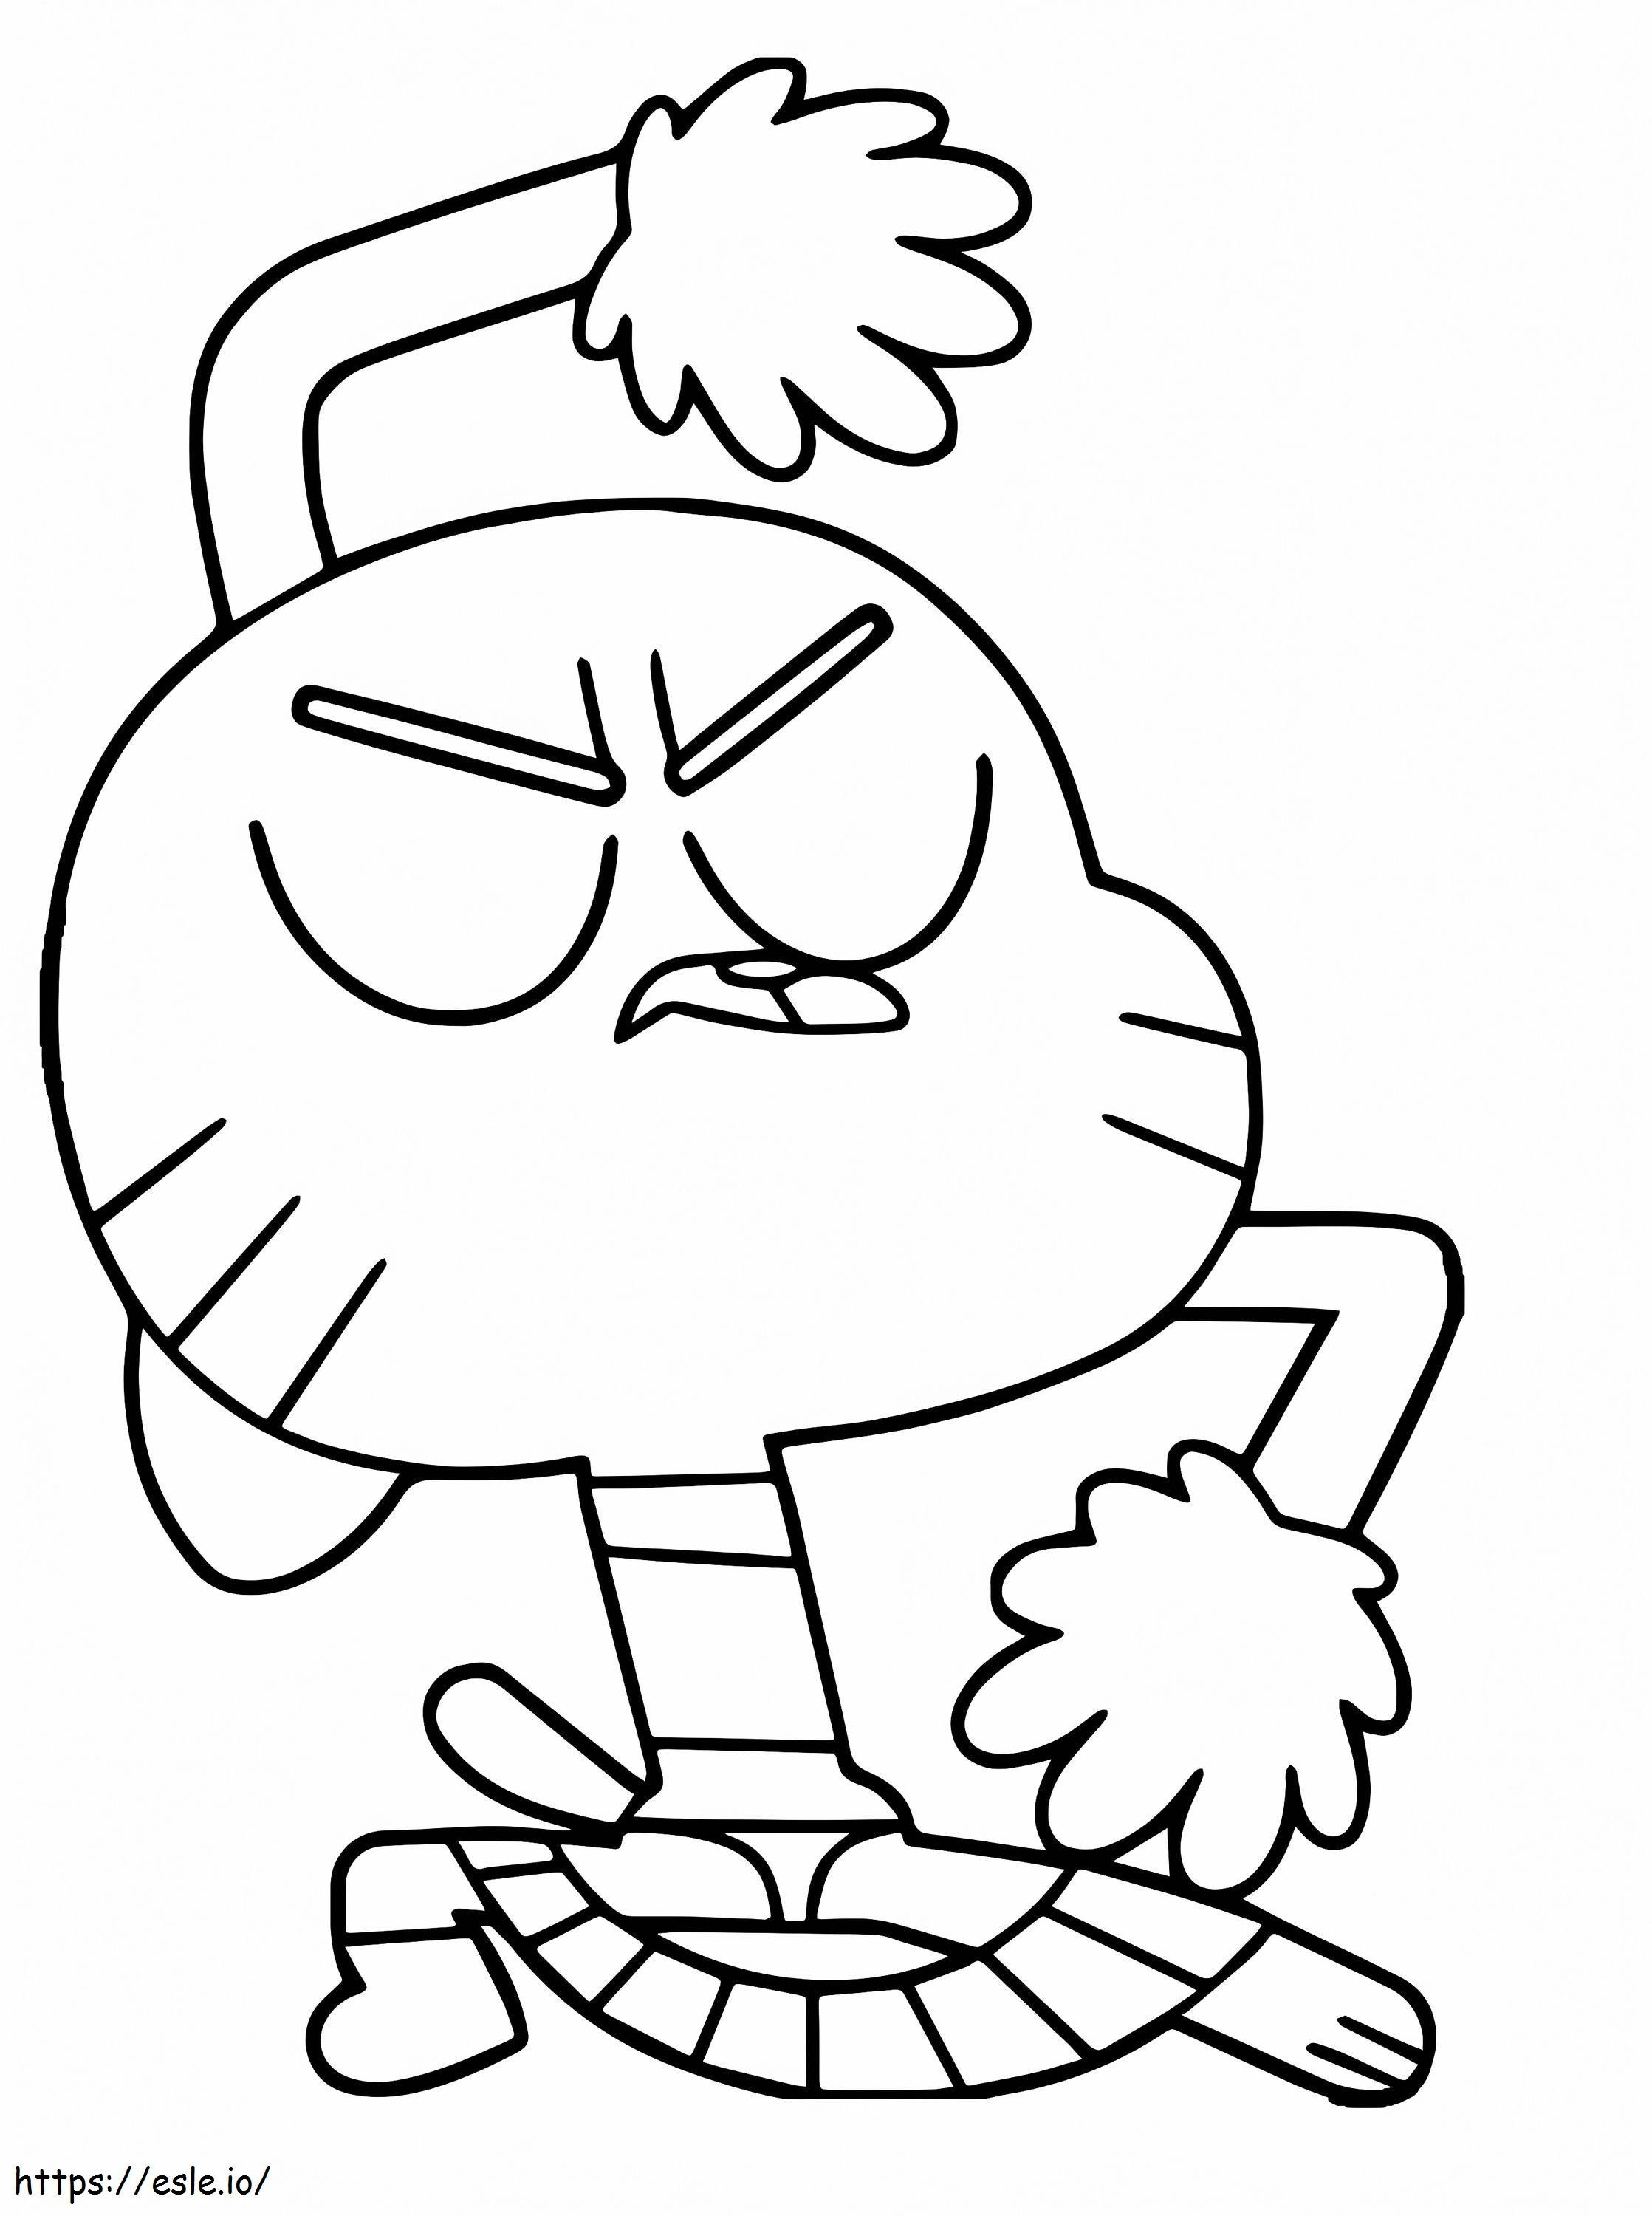 1570524583 Cheer Leader Gumball coloring page